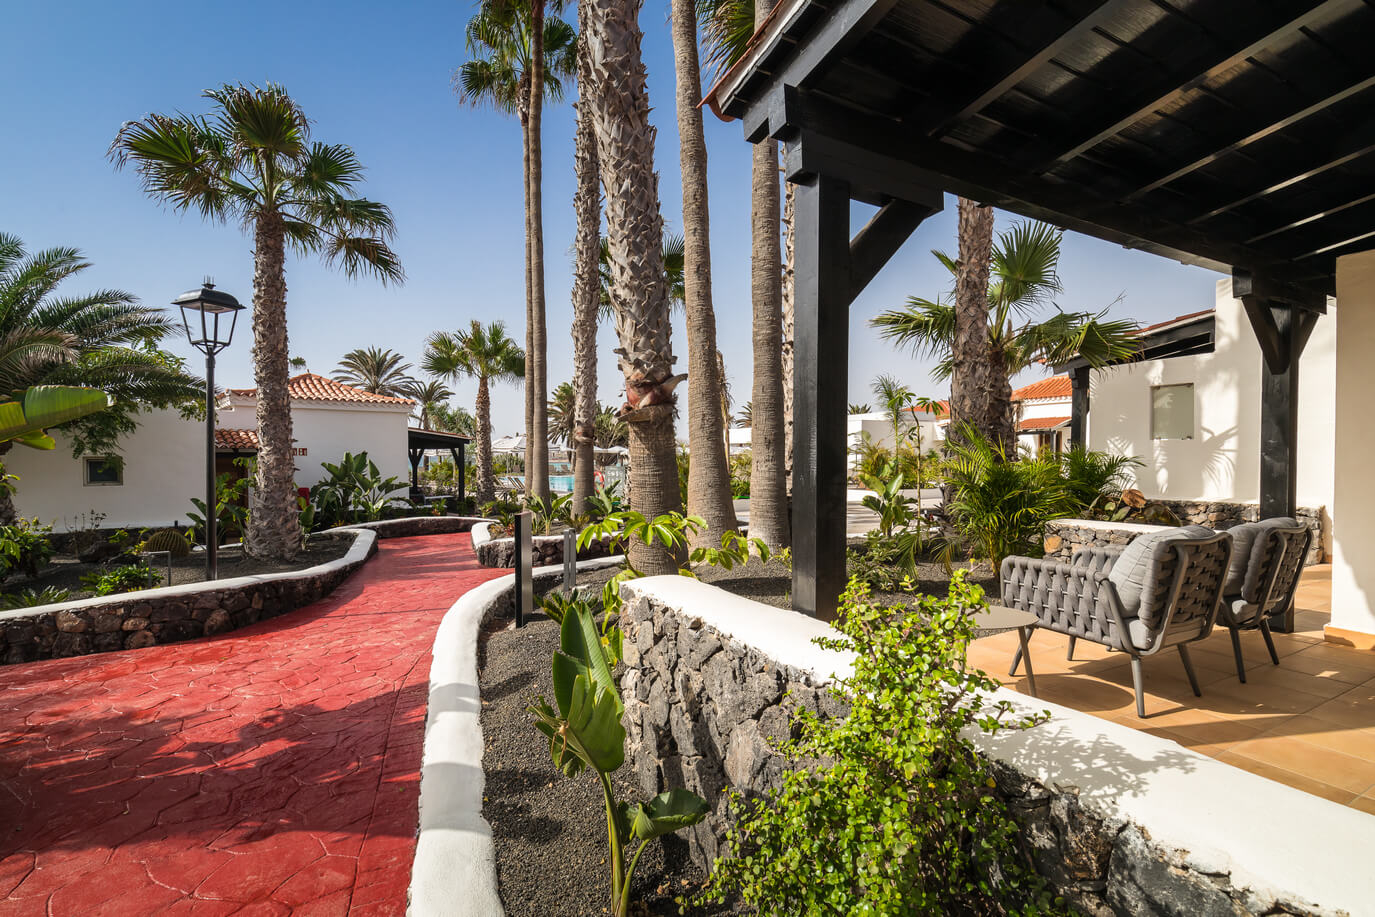 Fuerteventura tourist attractions: The grounds of the Barceló Fuerteventura Royal Level Adults Only hote